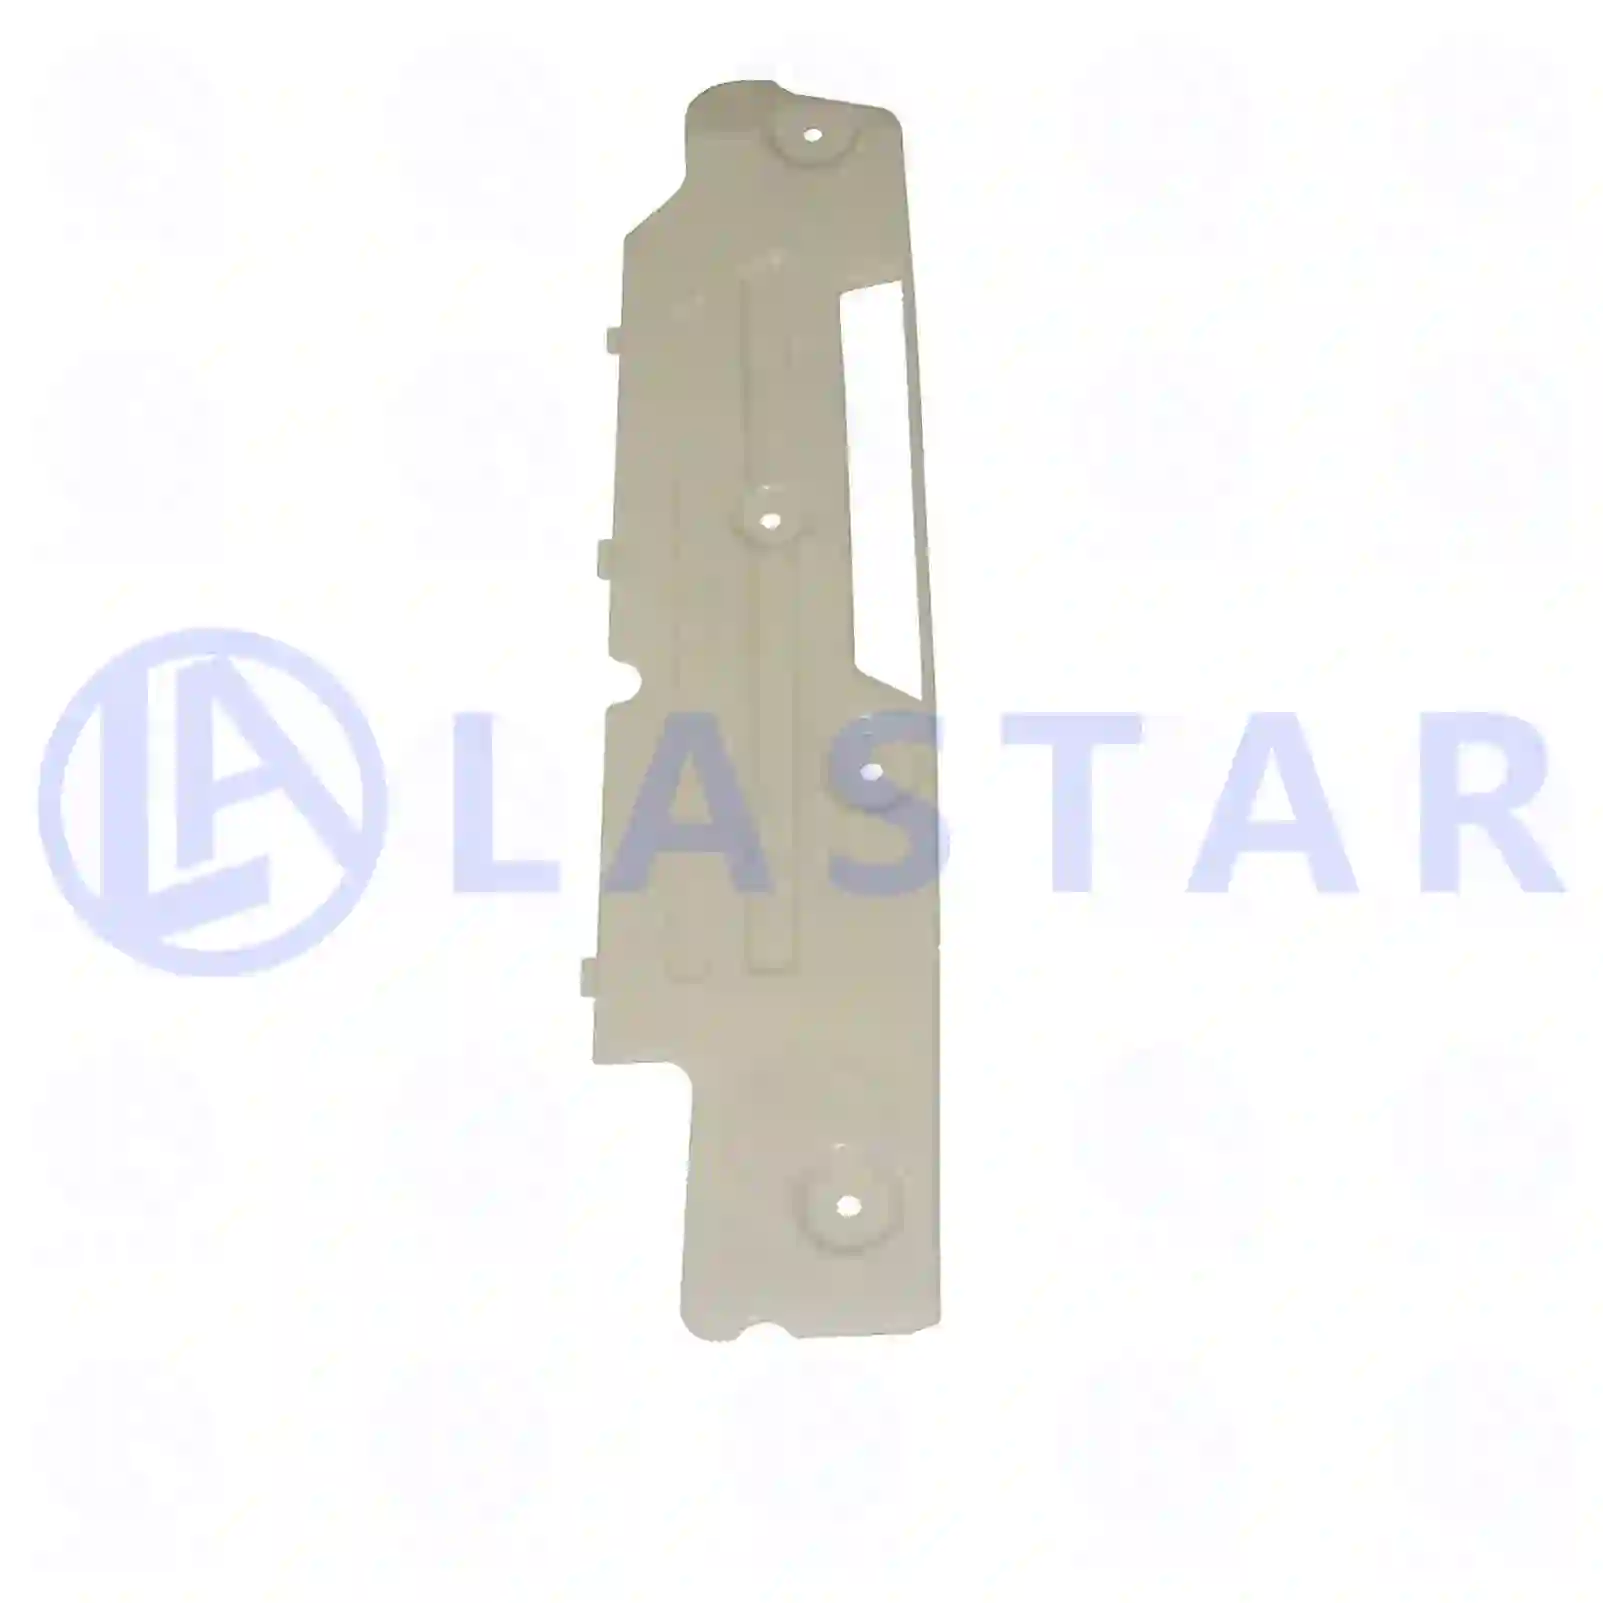 Cover, lamp housing, right, 77710959, 21451002, 82056991, ZG20013-0008 ||  77710959 Lastar Spare Part | Truck Spare Parts, Auotomotive Spare Parts Cover, lamp housing, right, 77710959, 21451002, 82056991, ZG20013-0008 ||  77710959 Lastar Spare Part | Truck Spare Parts, Auotomotive Spare Parts